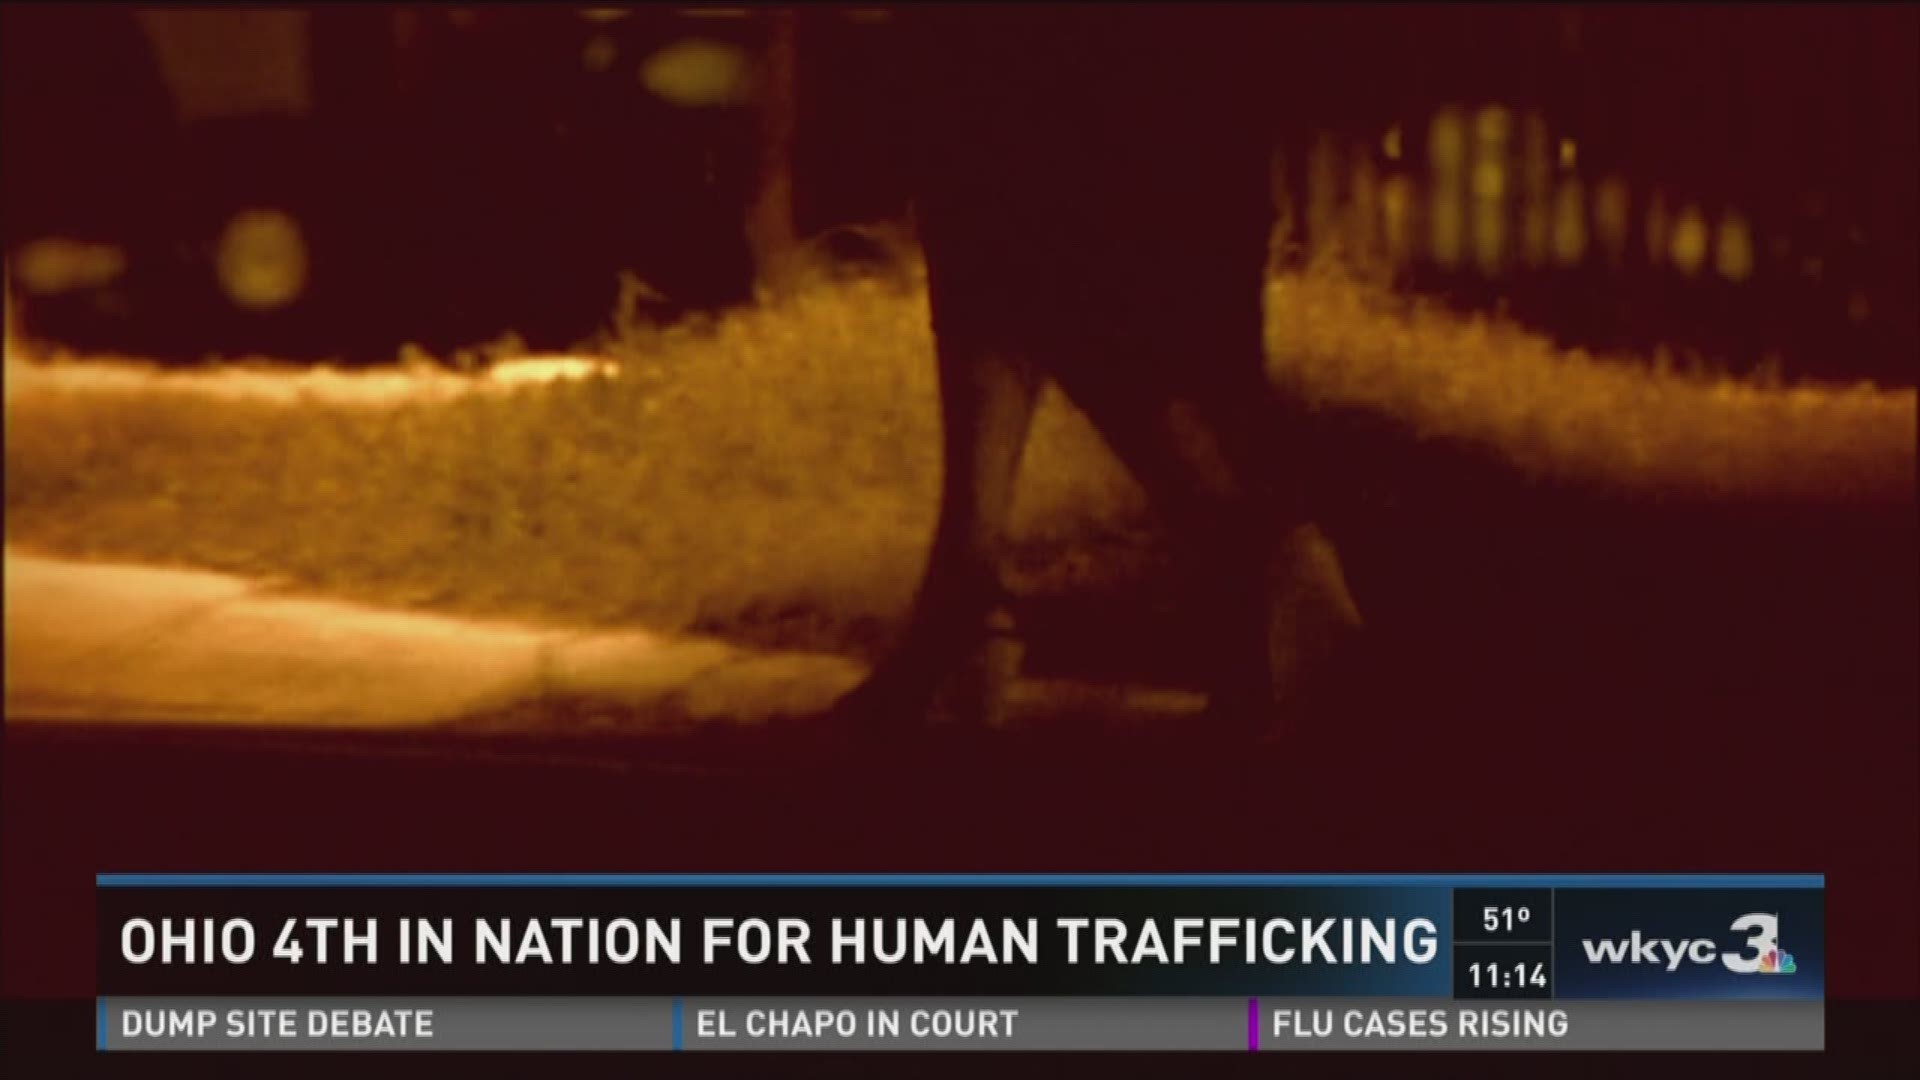 Ohio 4th in nation for human trafficking